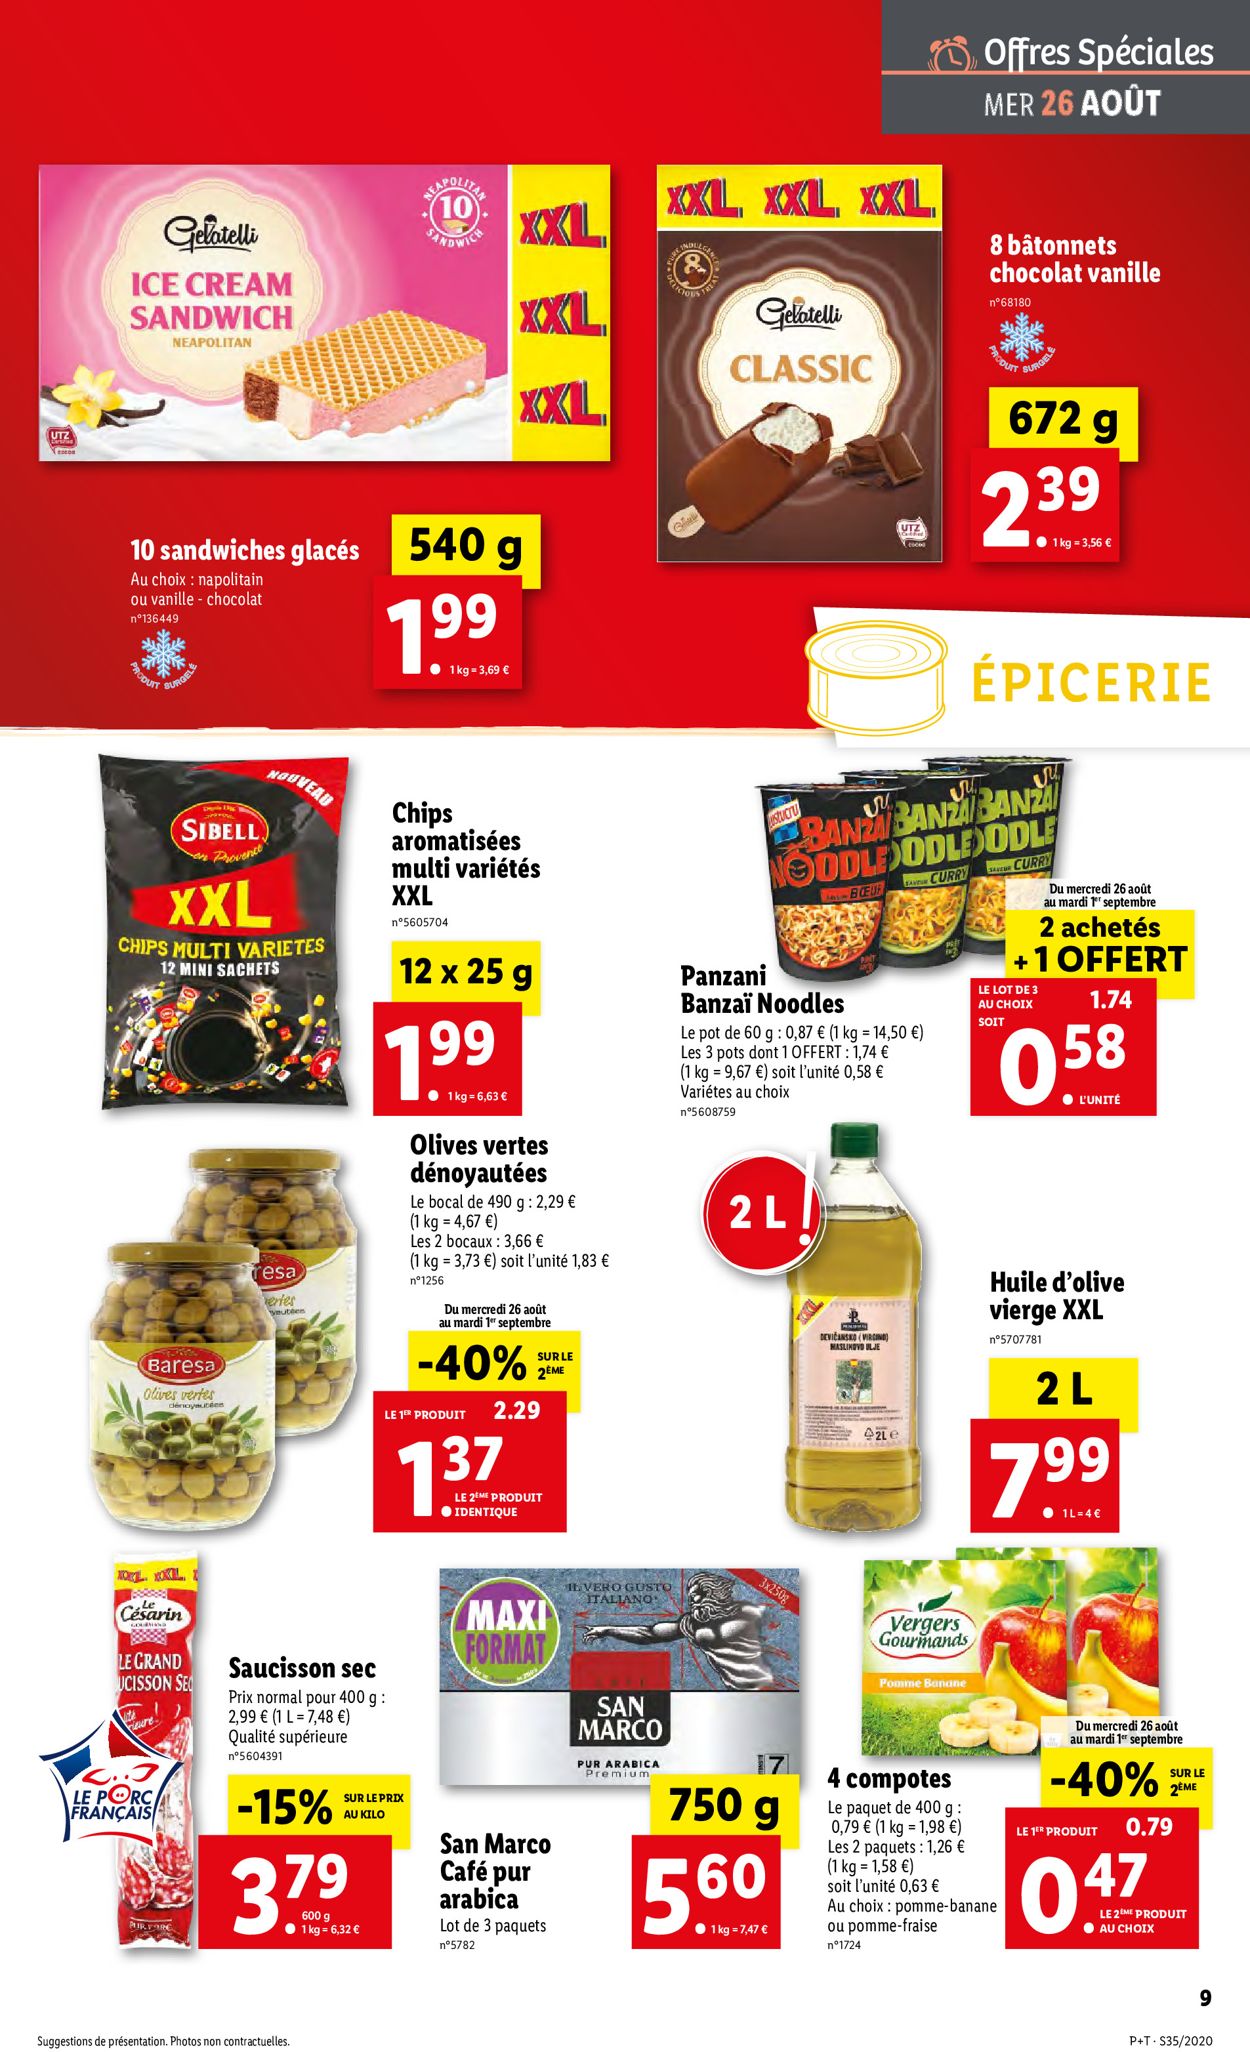 Lidl Catalogue - 26.08-01.09.2020 (Page 9)